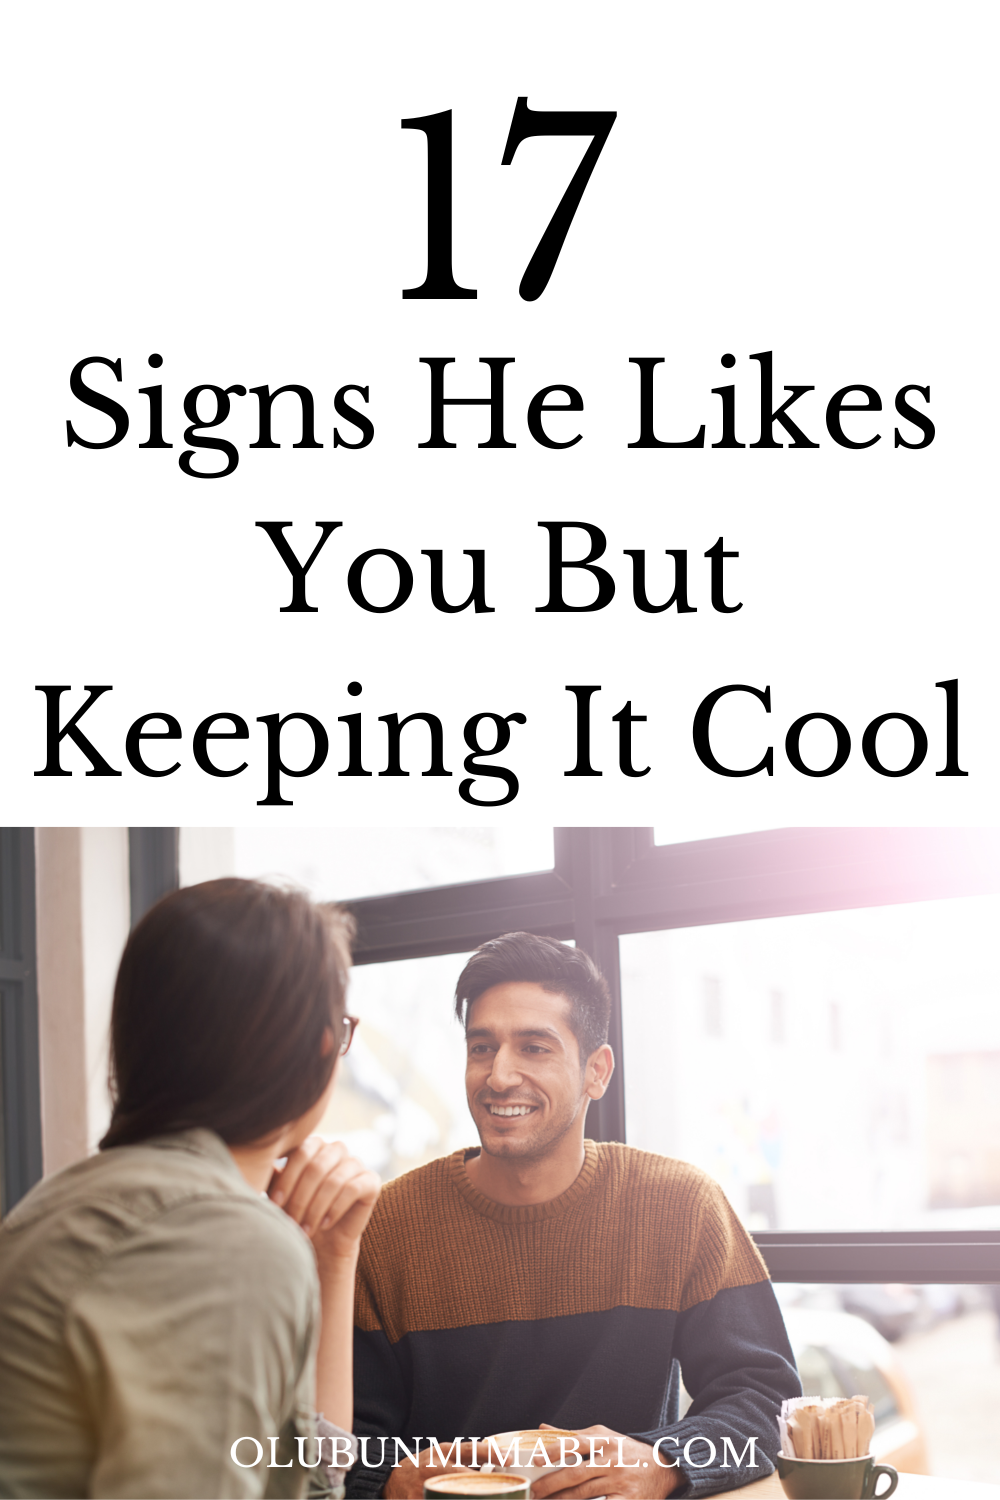 Signs He Likes You But is Playing it Cool